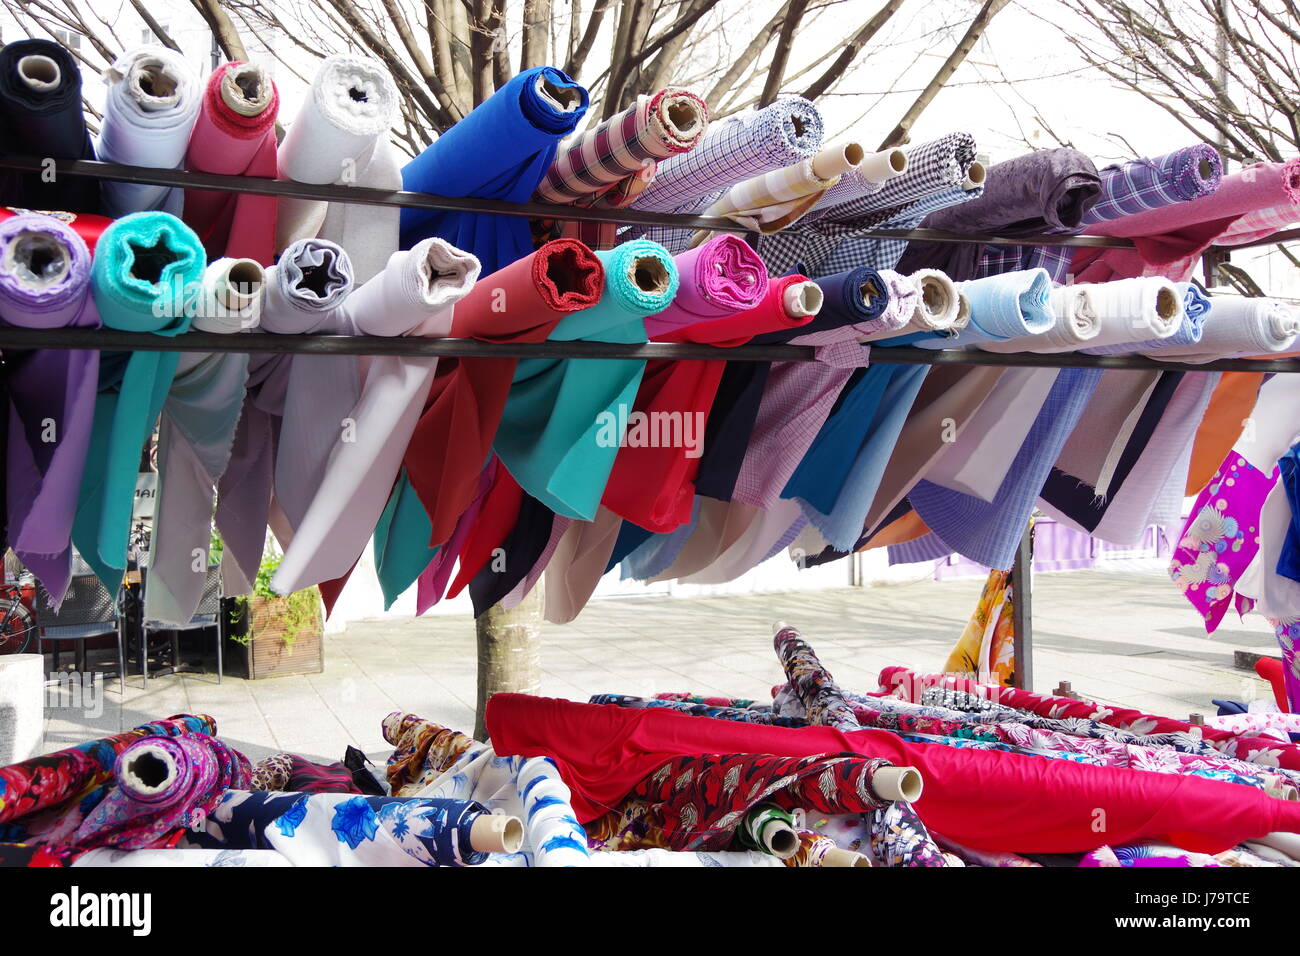 Rolls of colourful headscarf and sari material for sale on a fabric stall at Chalton Street Market in London UK Stock Photo